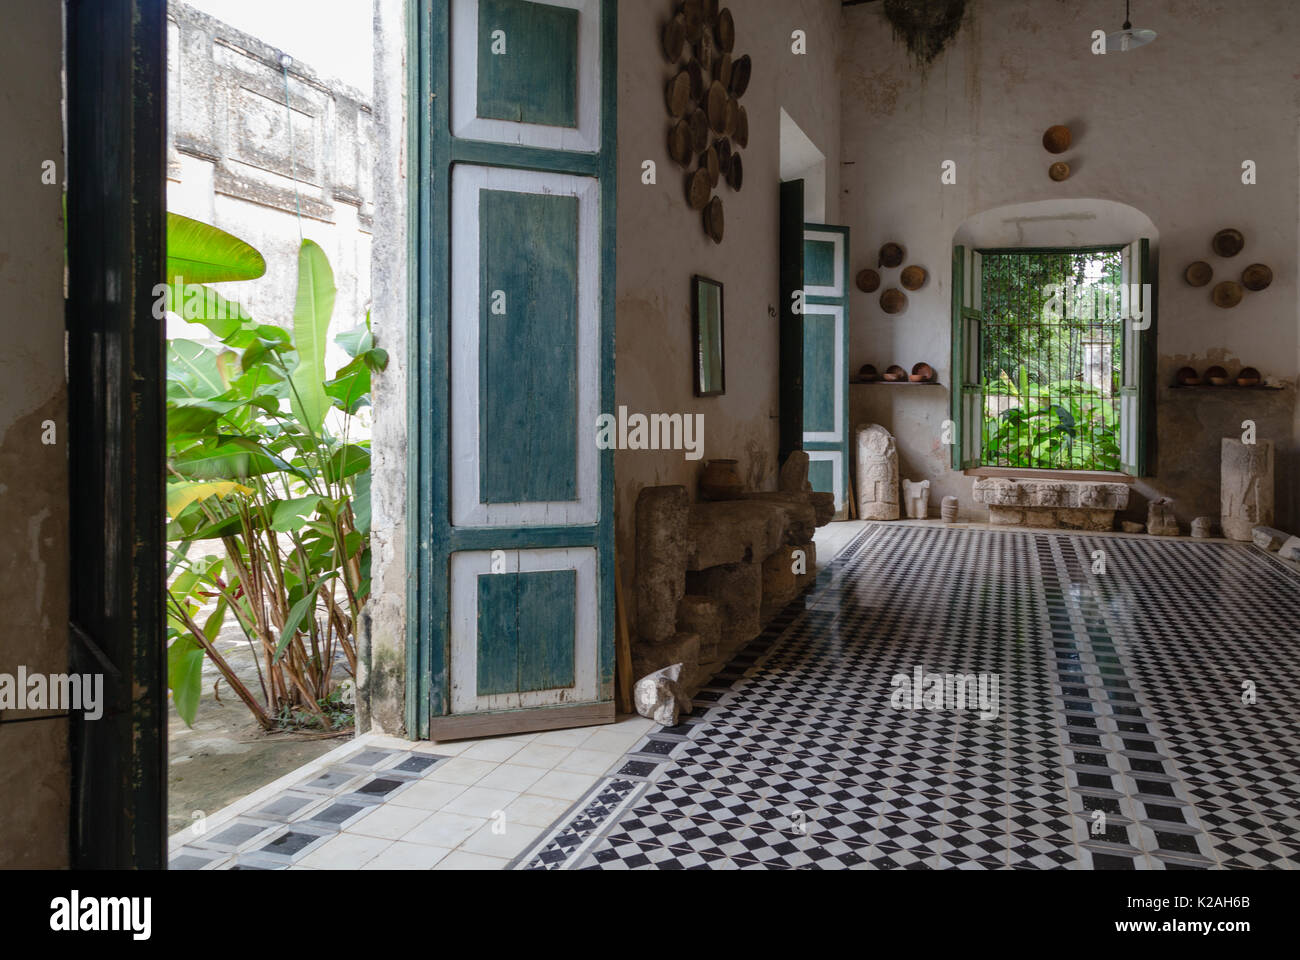 One of the rooms decorated with pottery and tile floor is with Black and white geometric tiles at Hacienda Yaxcopoil, Yaxcopoil, Yucatan, Mexico. Stock Photo